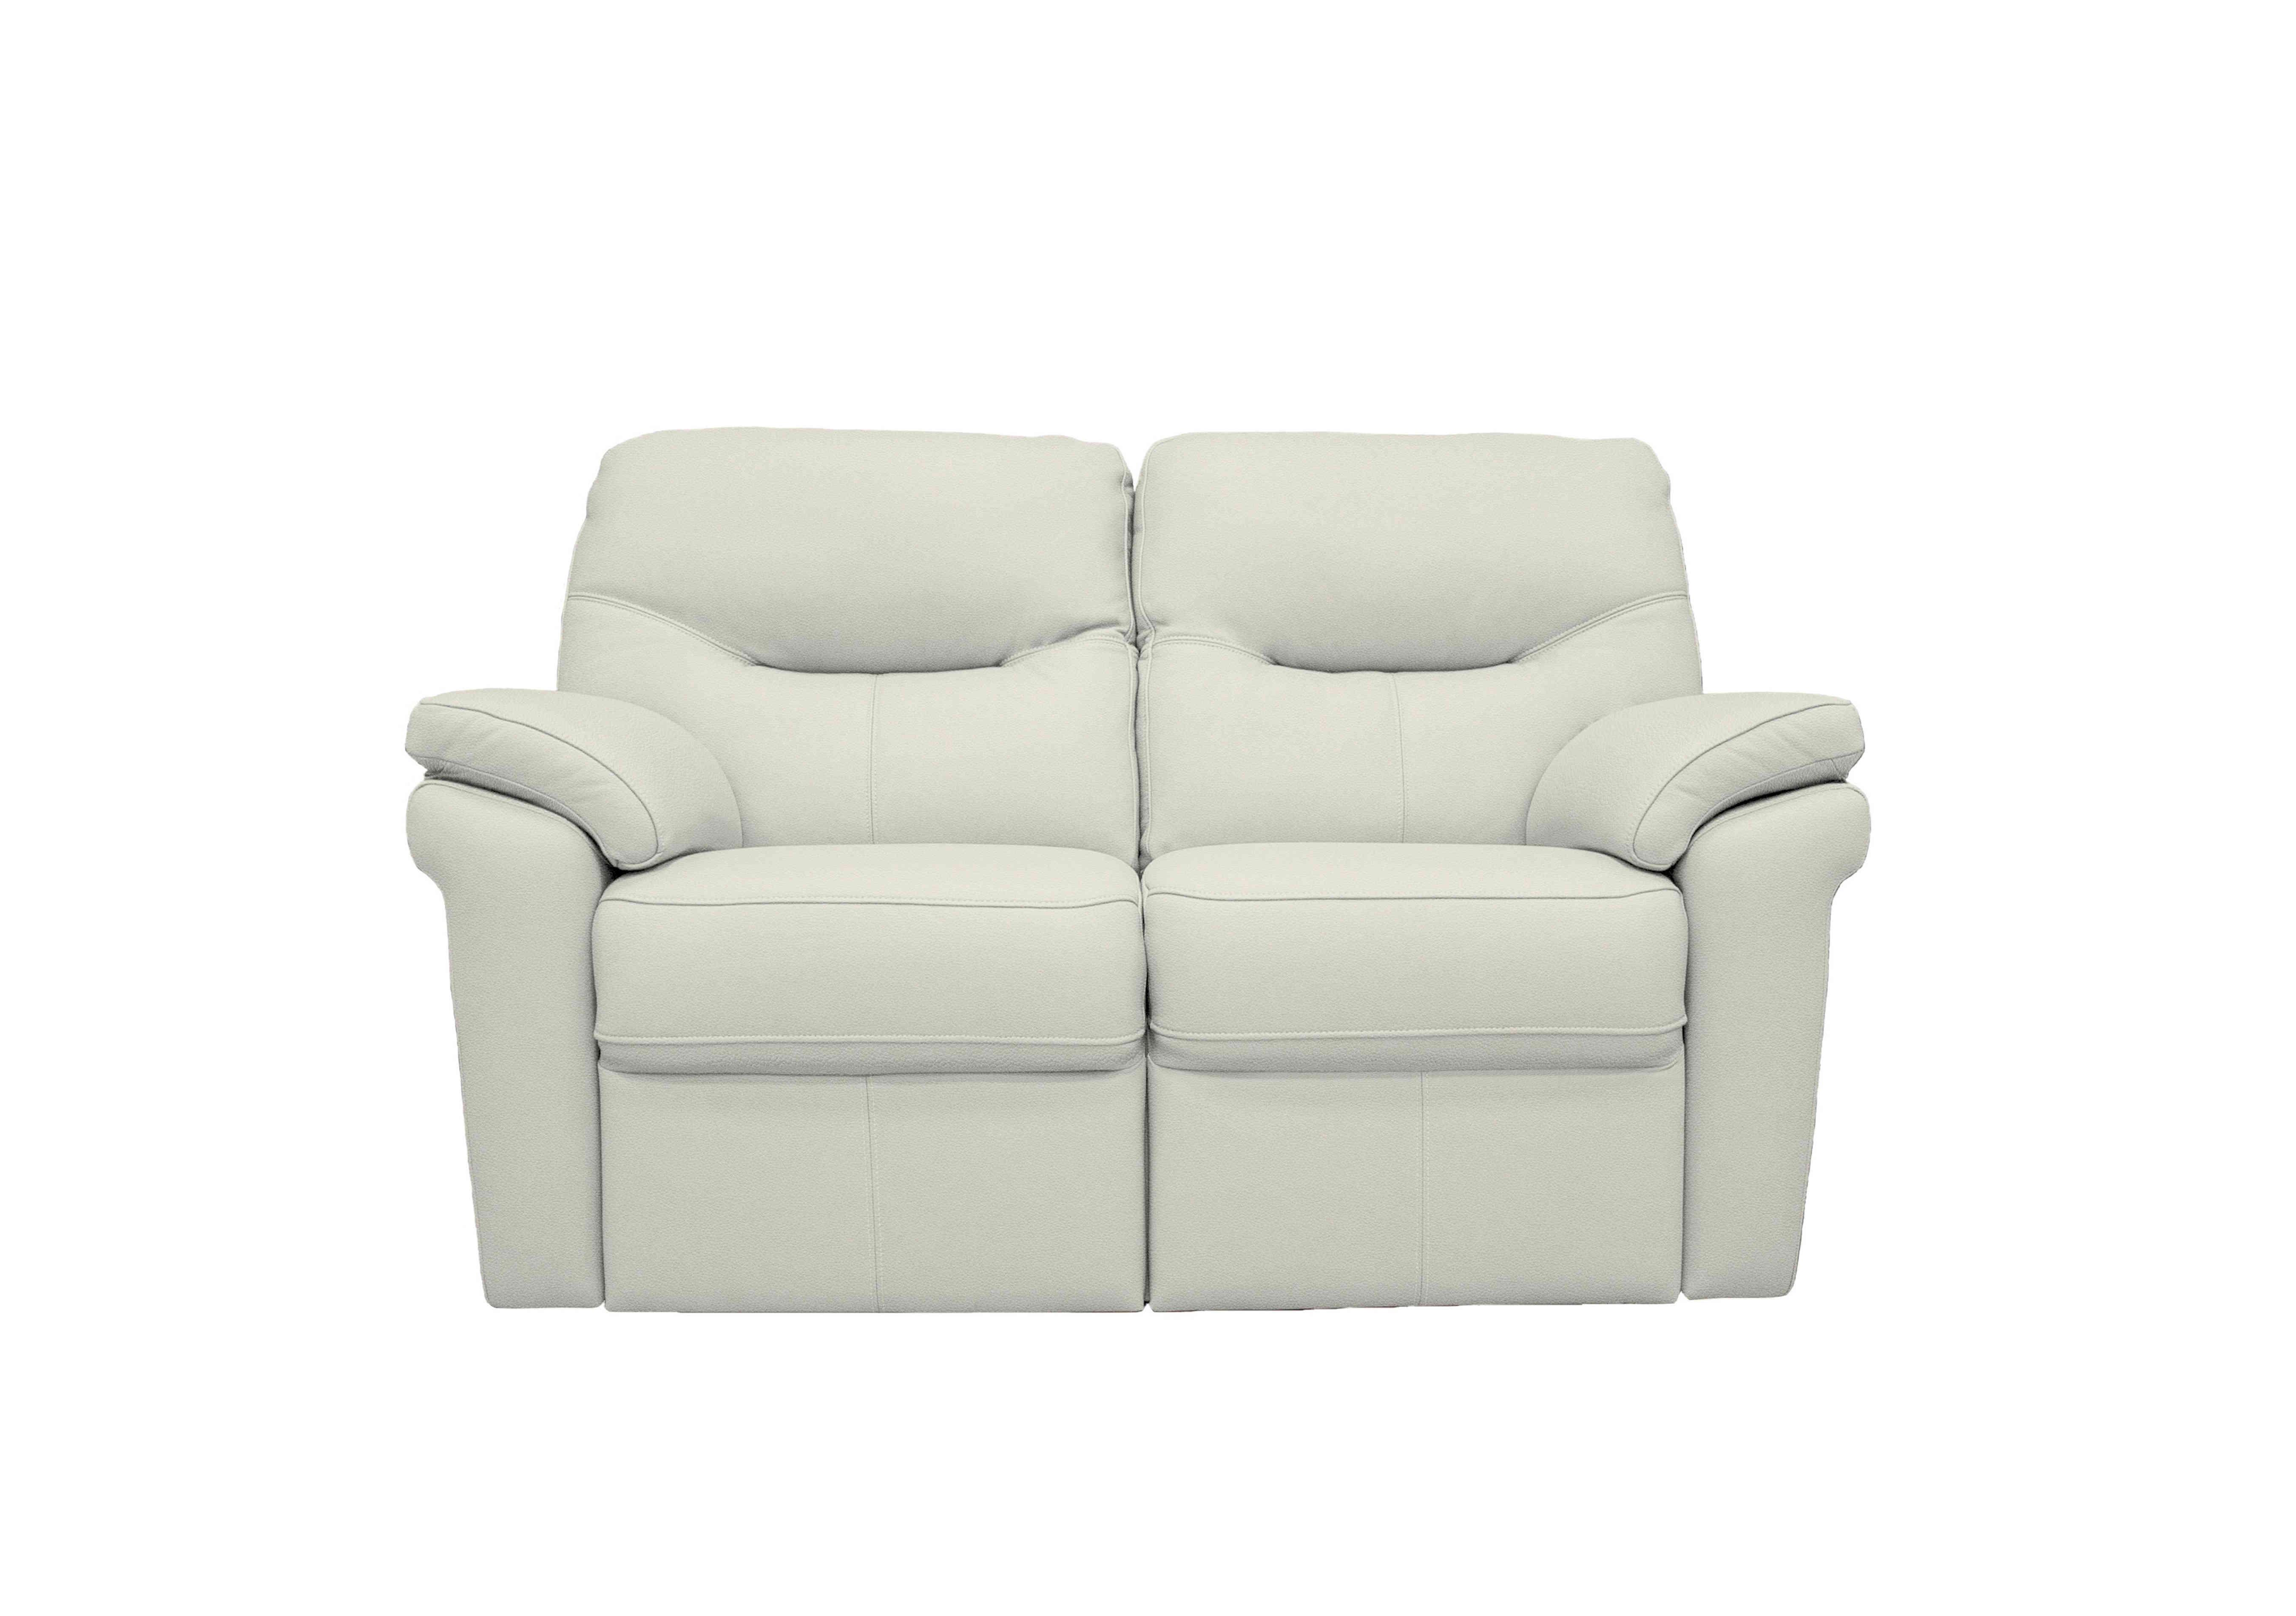 Seattle 2 Seater Leather Sofa in H005 Oxford Chalk on Furniture Village